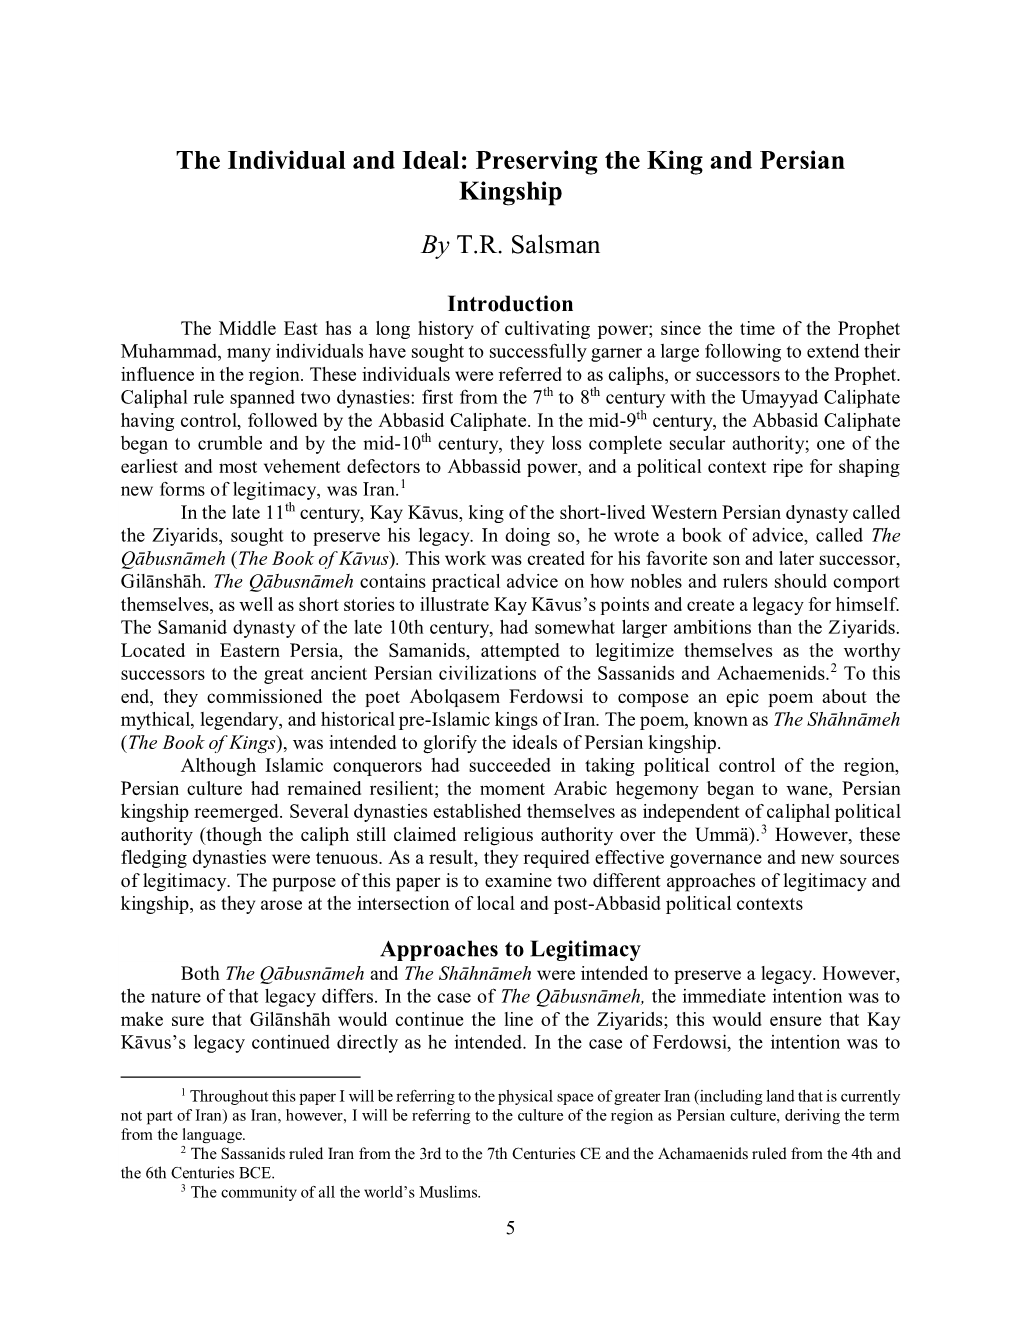 Preserving the King and Persian Kingship by TR